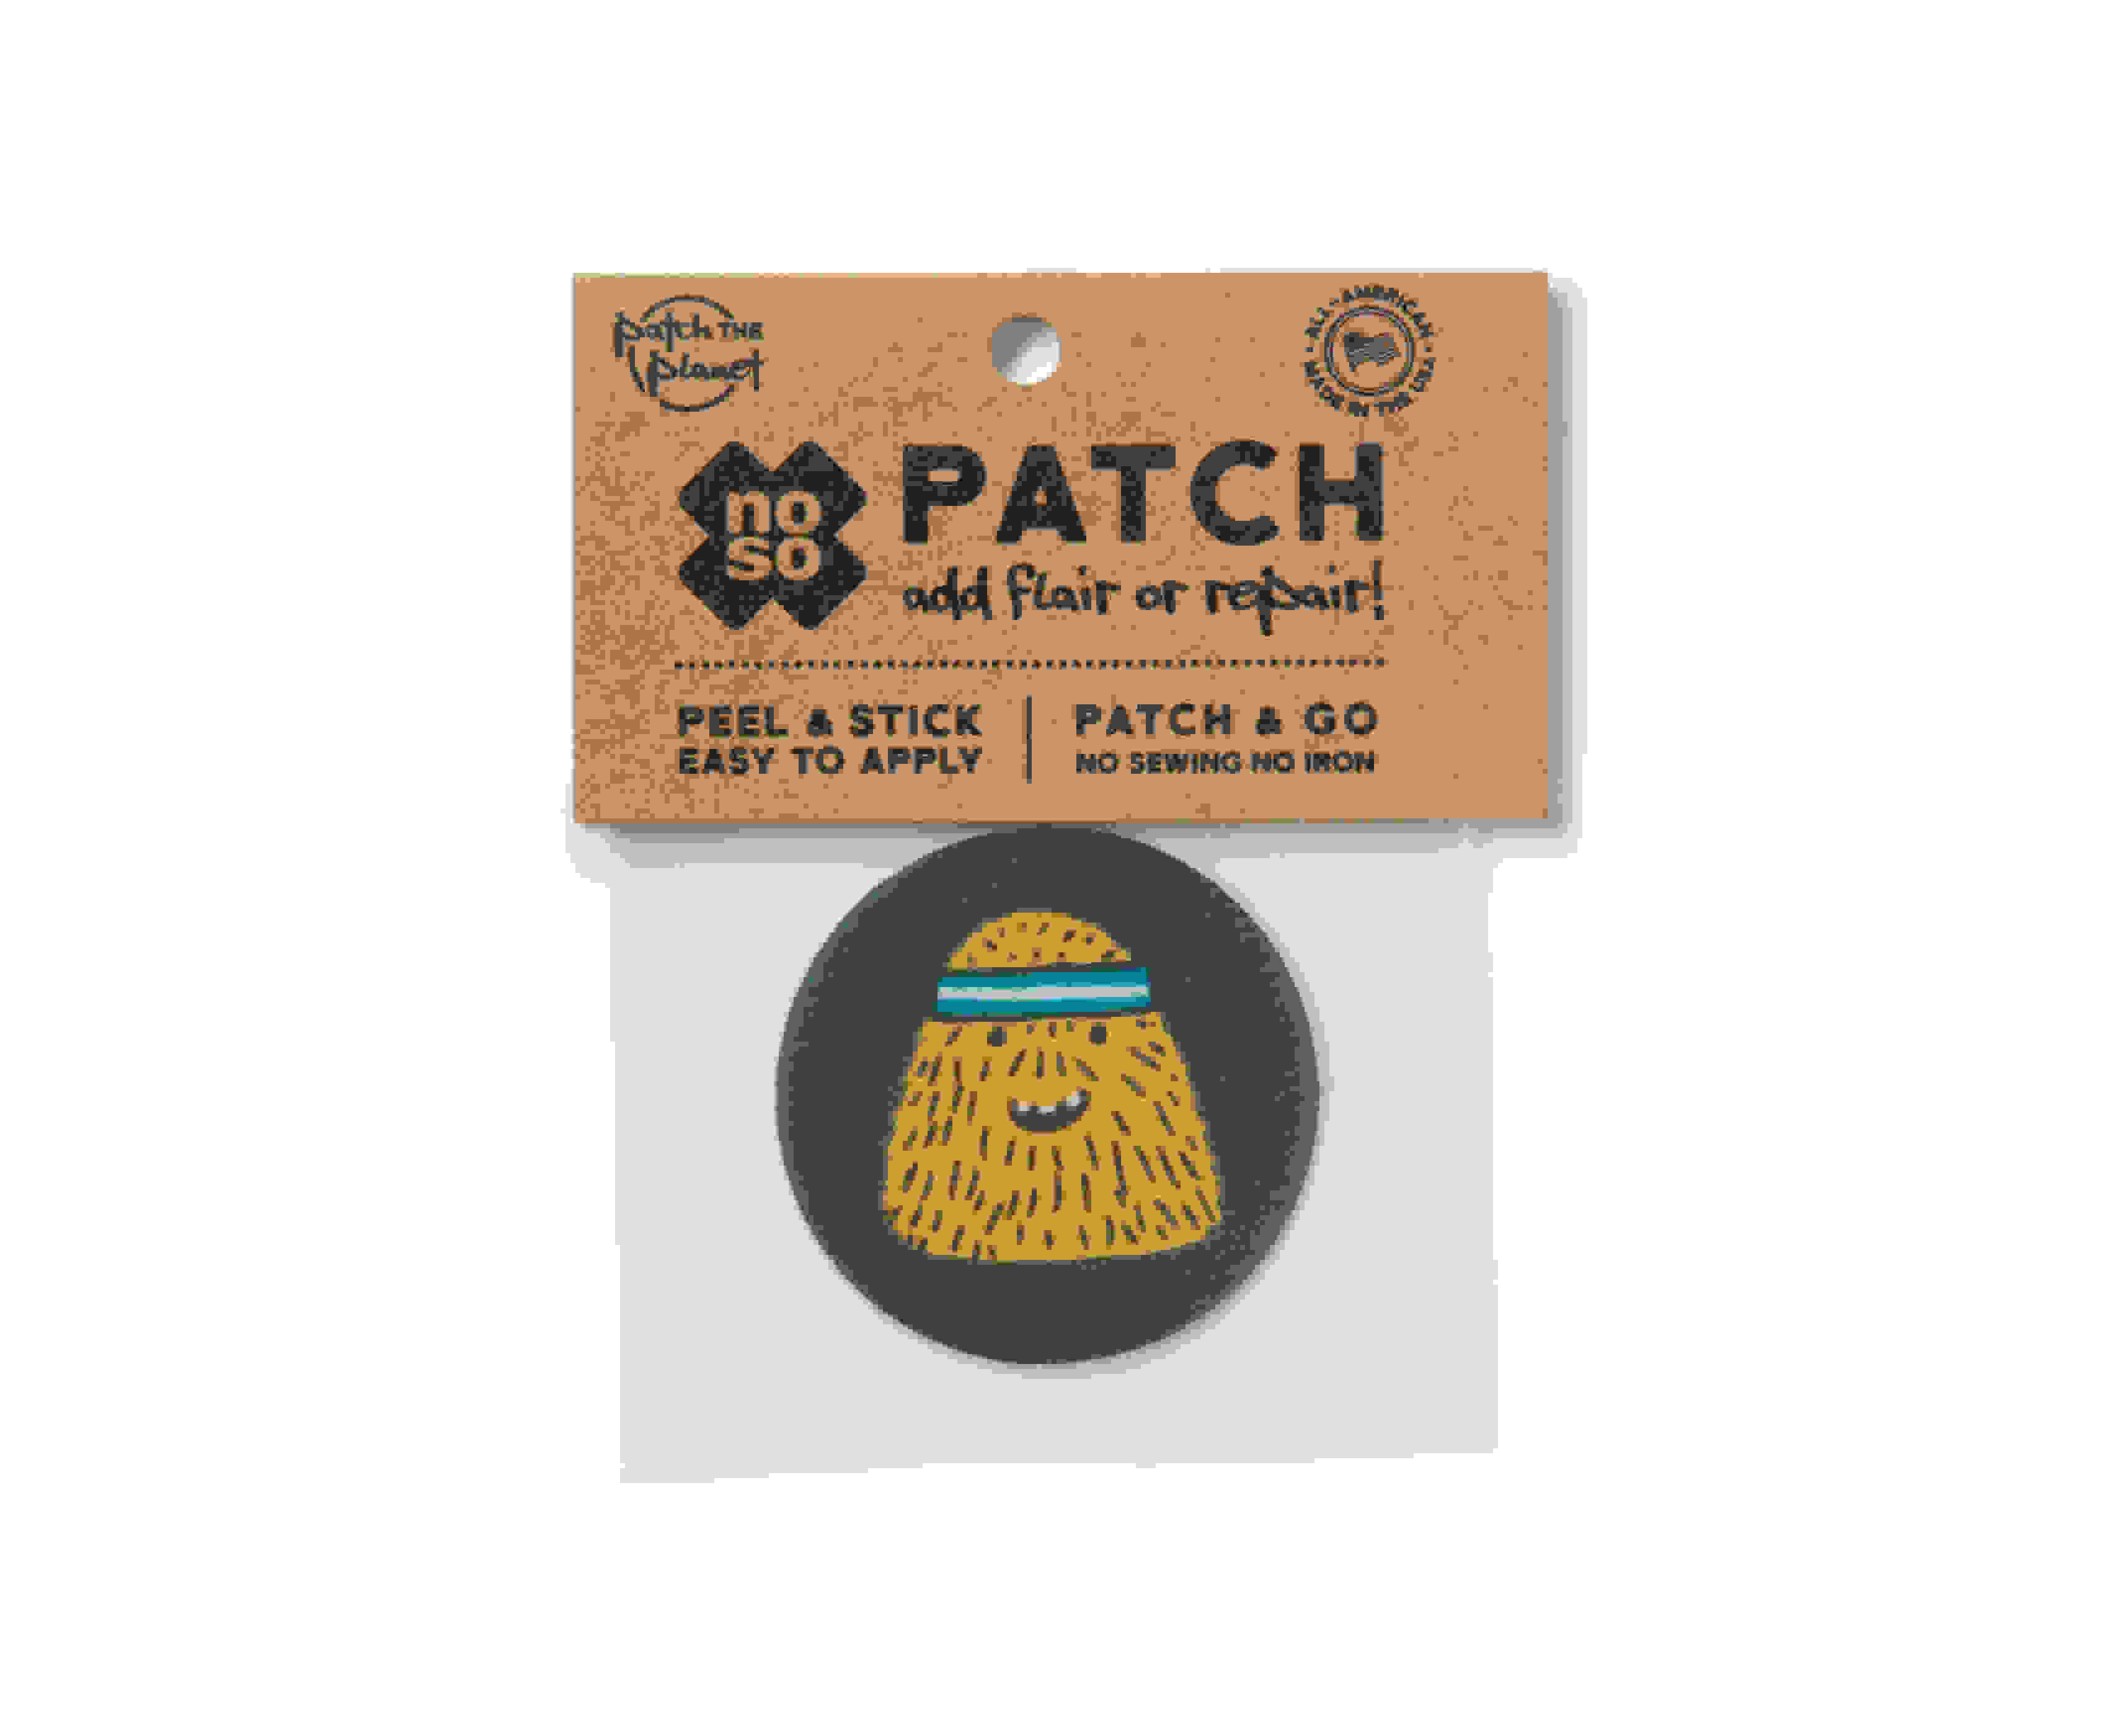 Add patch to backpack no sewing or ironing! 